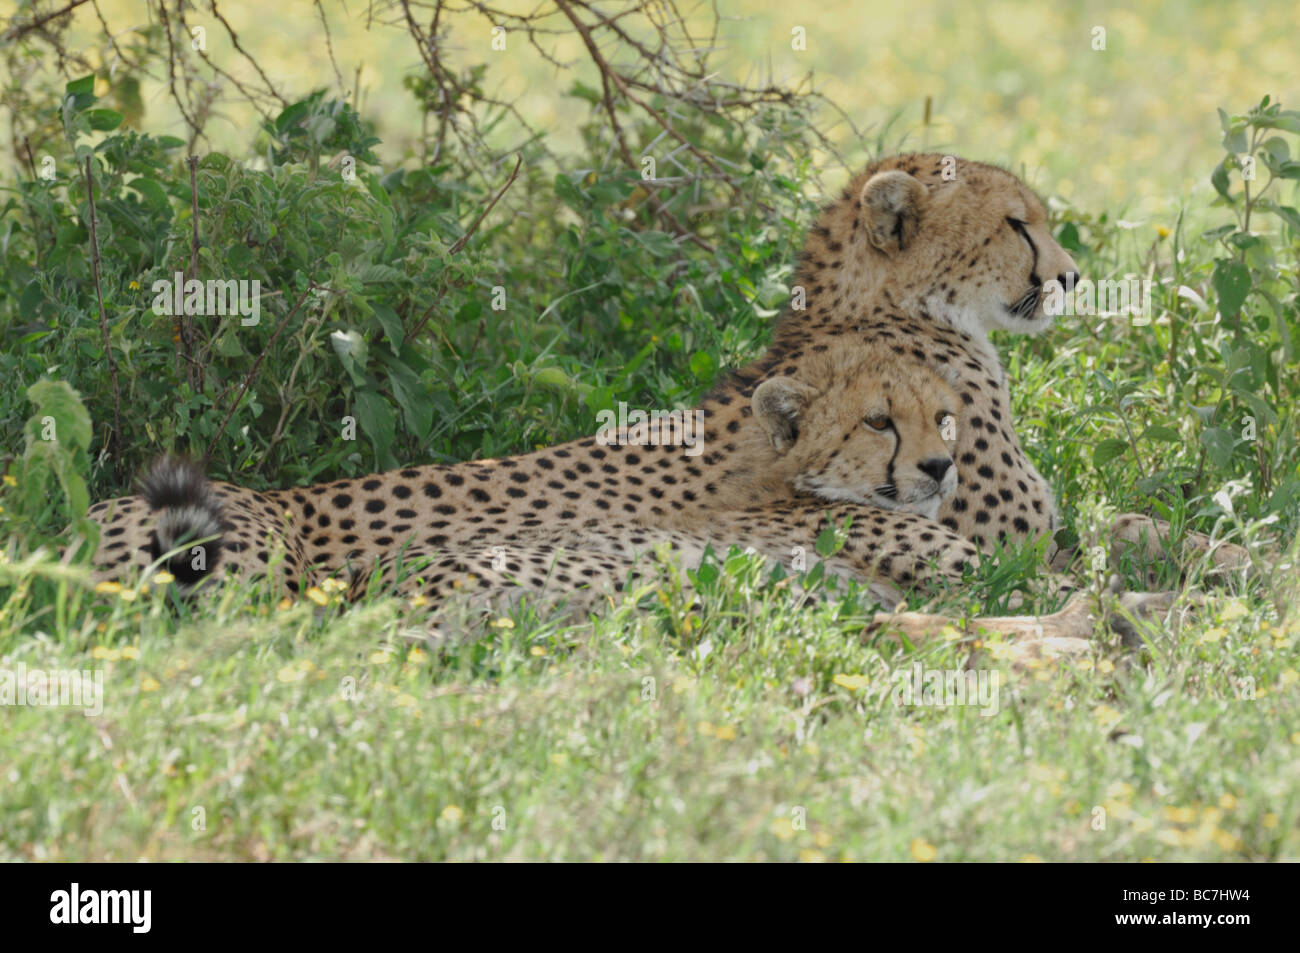 Stock photo of a young cheetah resting in th grass, Serengeti National Park, Tanzania, February 2009. Stock Photo